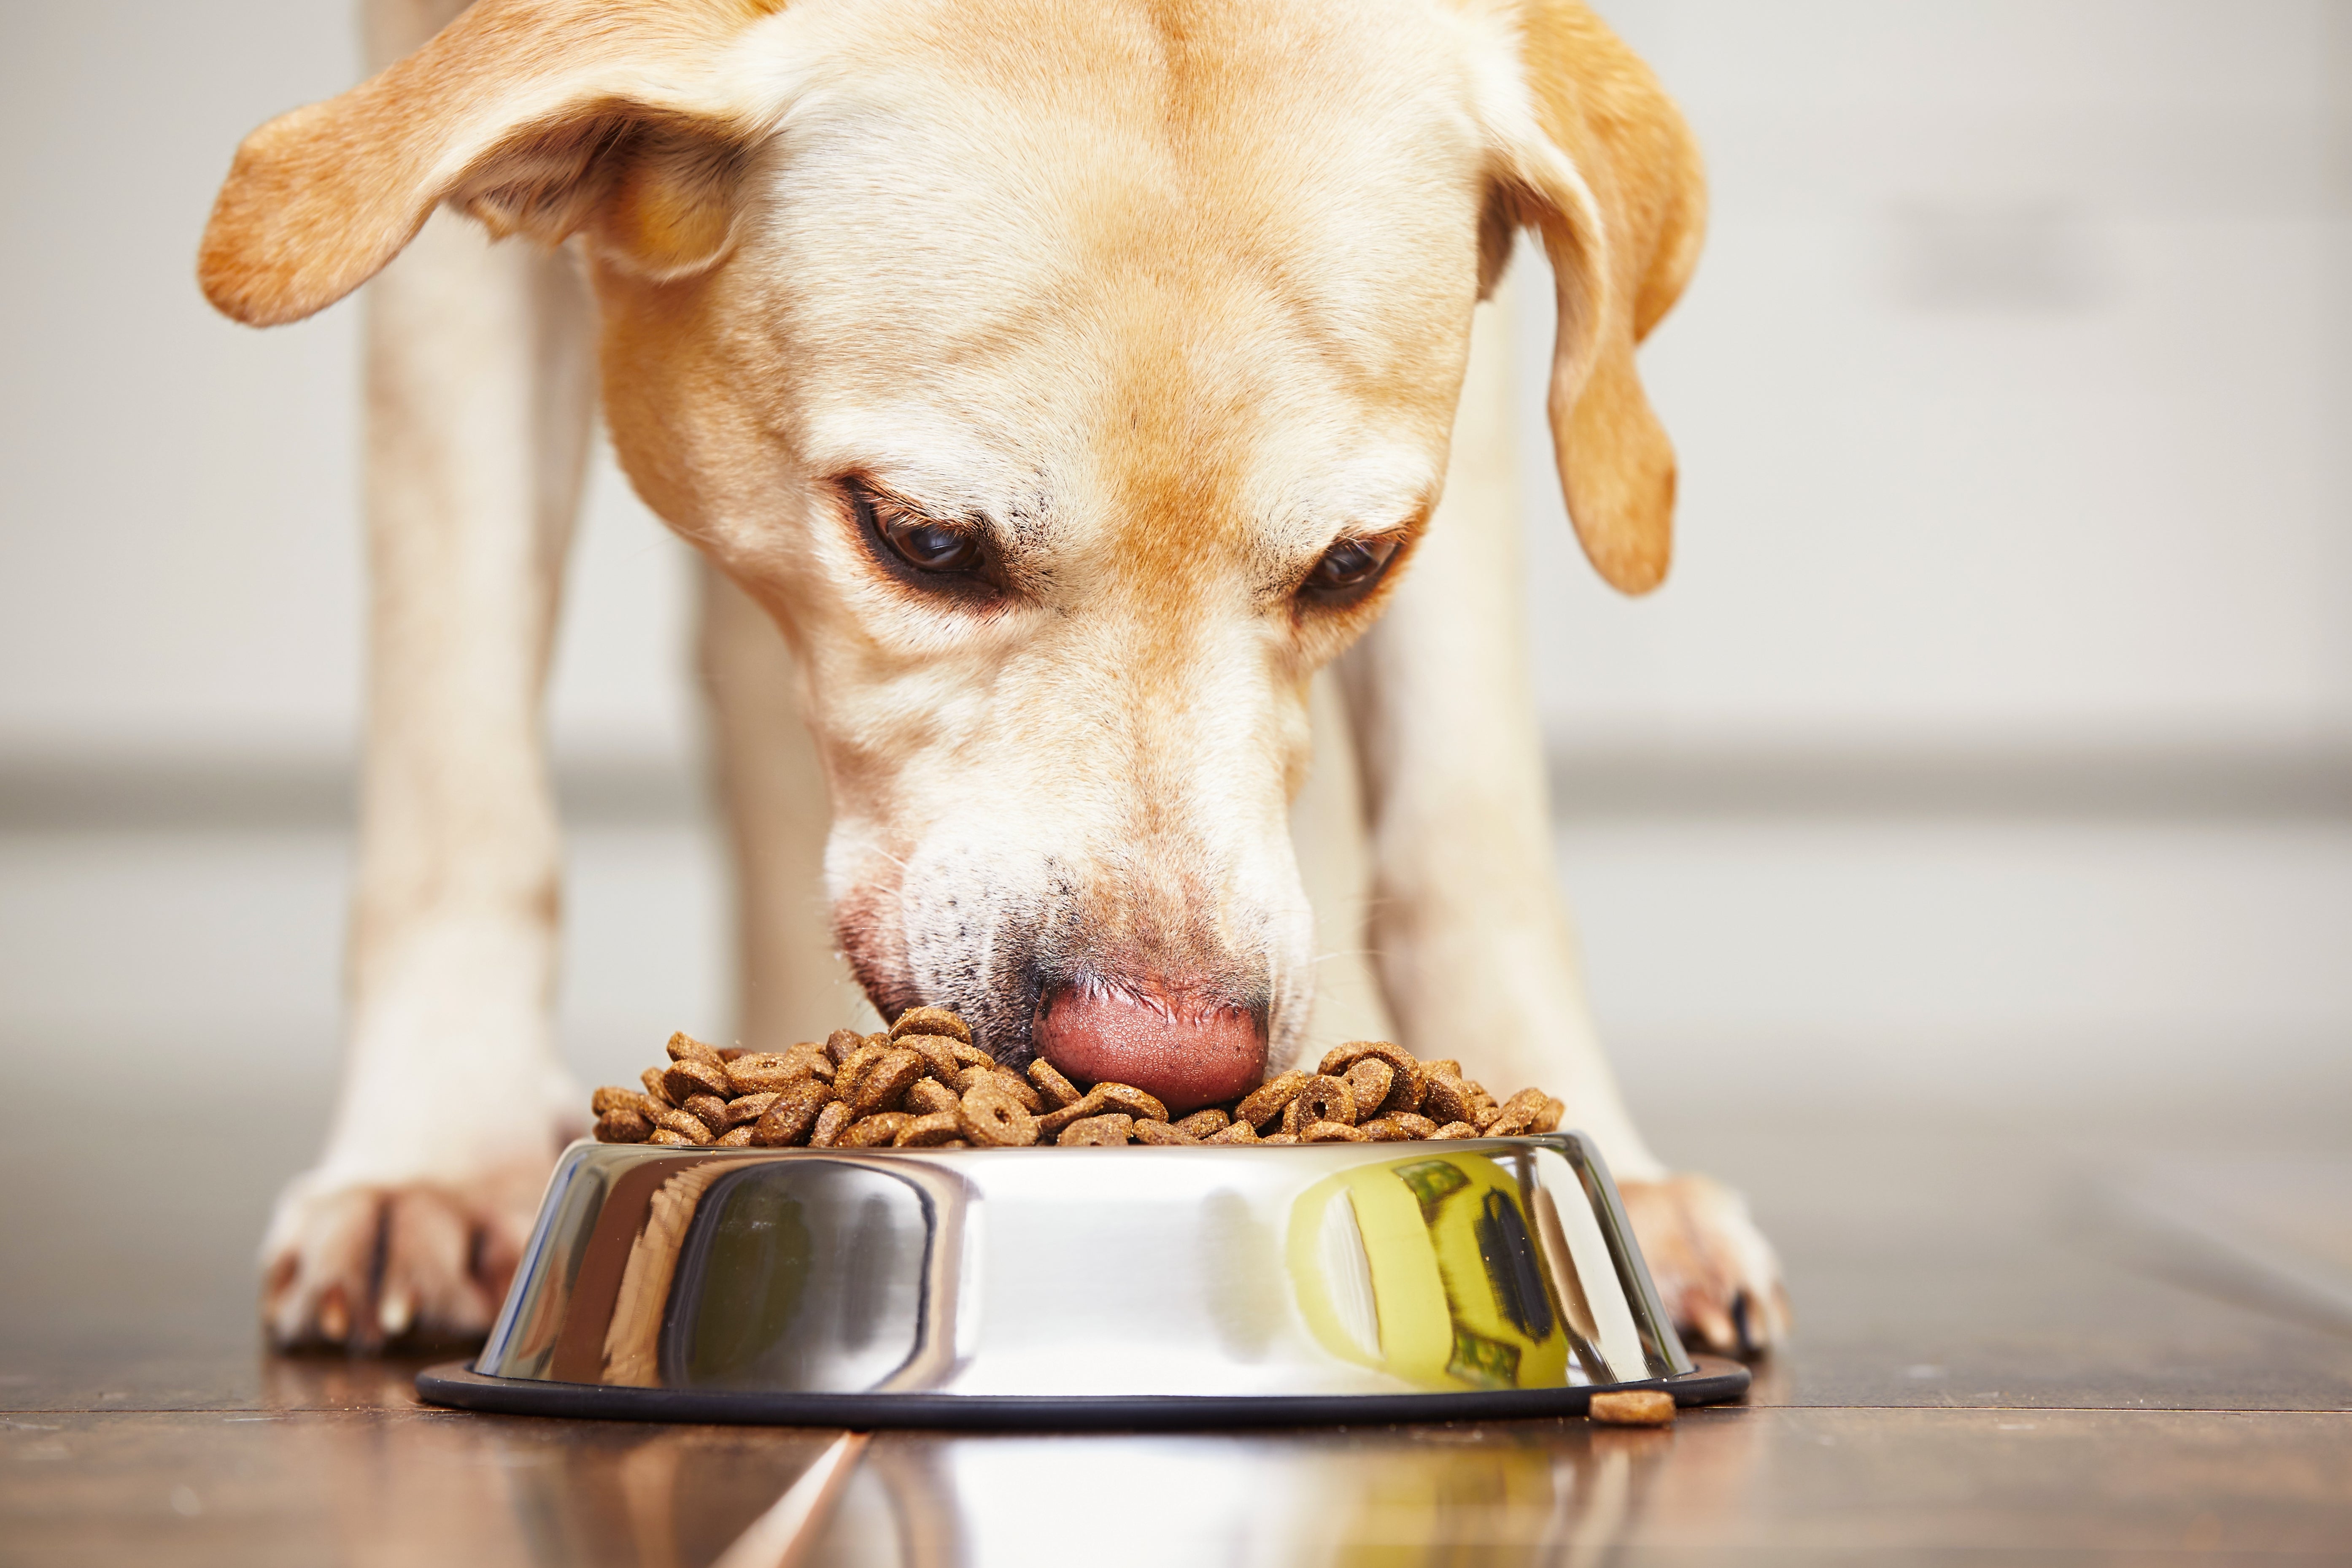 Pet food recalled after 28 dogs die, FDA says